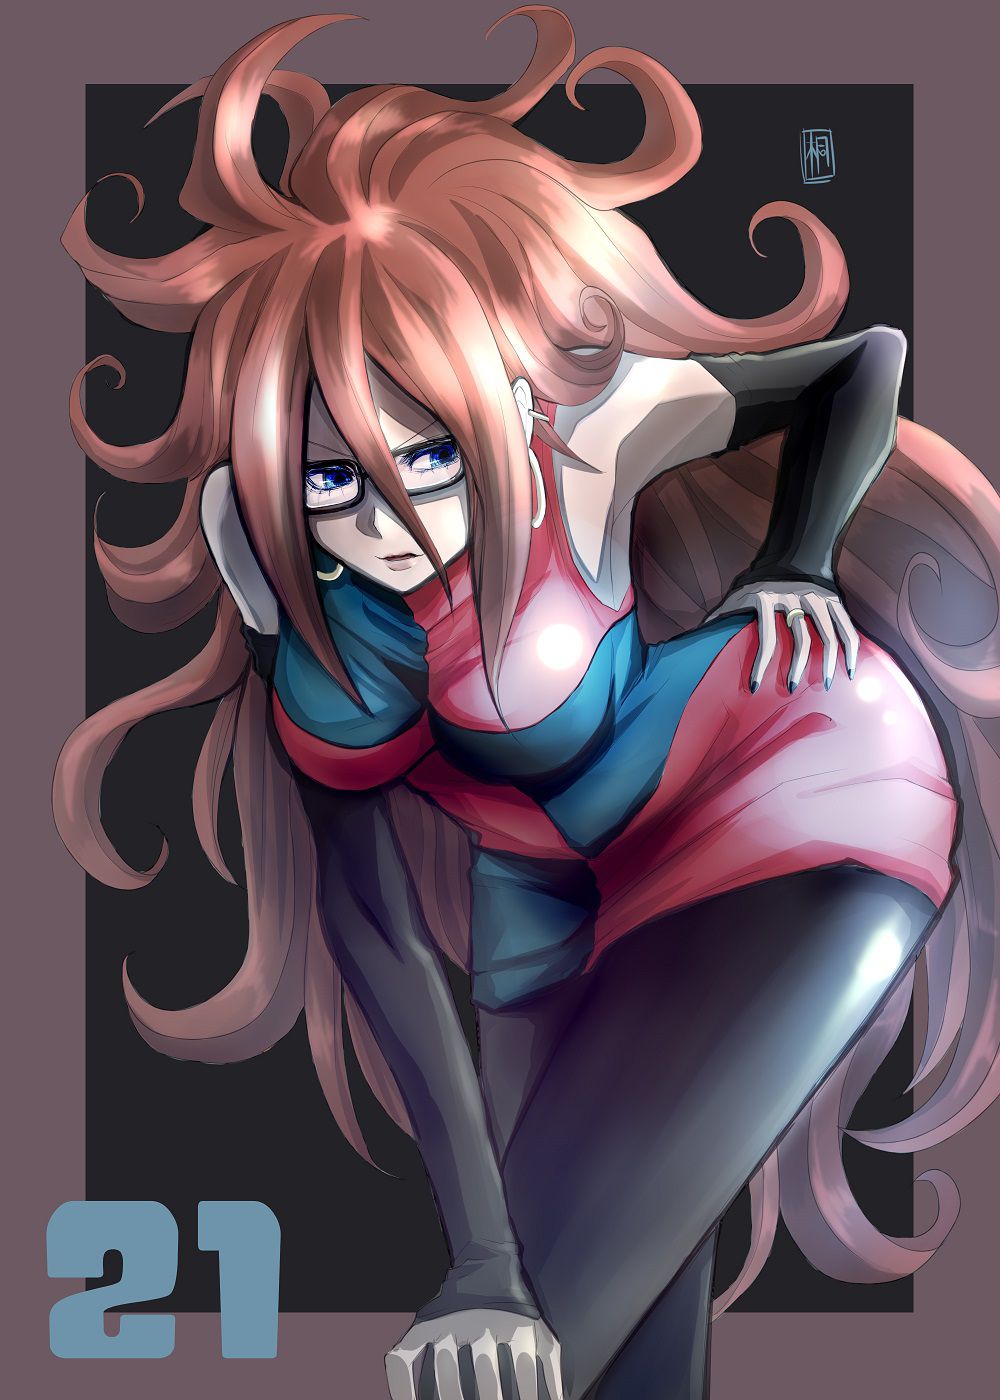 My Favorite Android 21 Pics 37